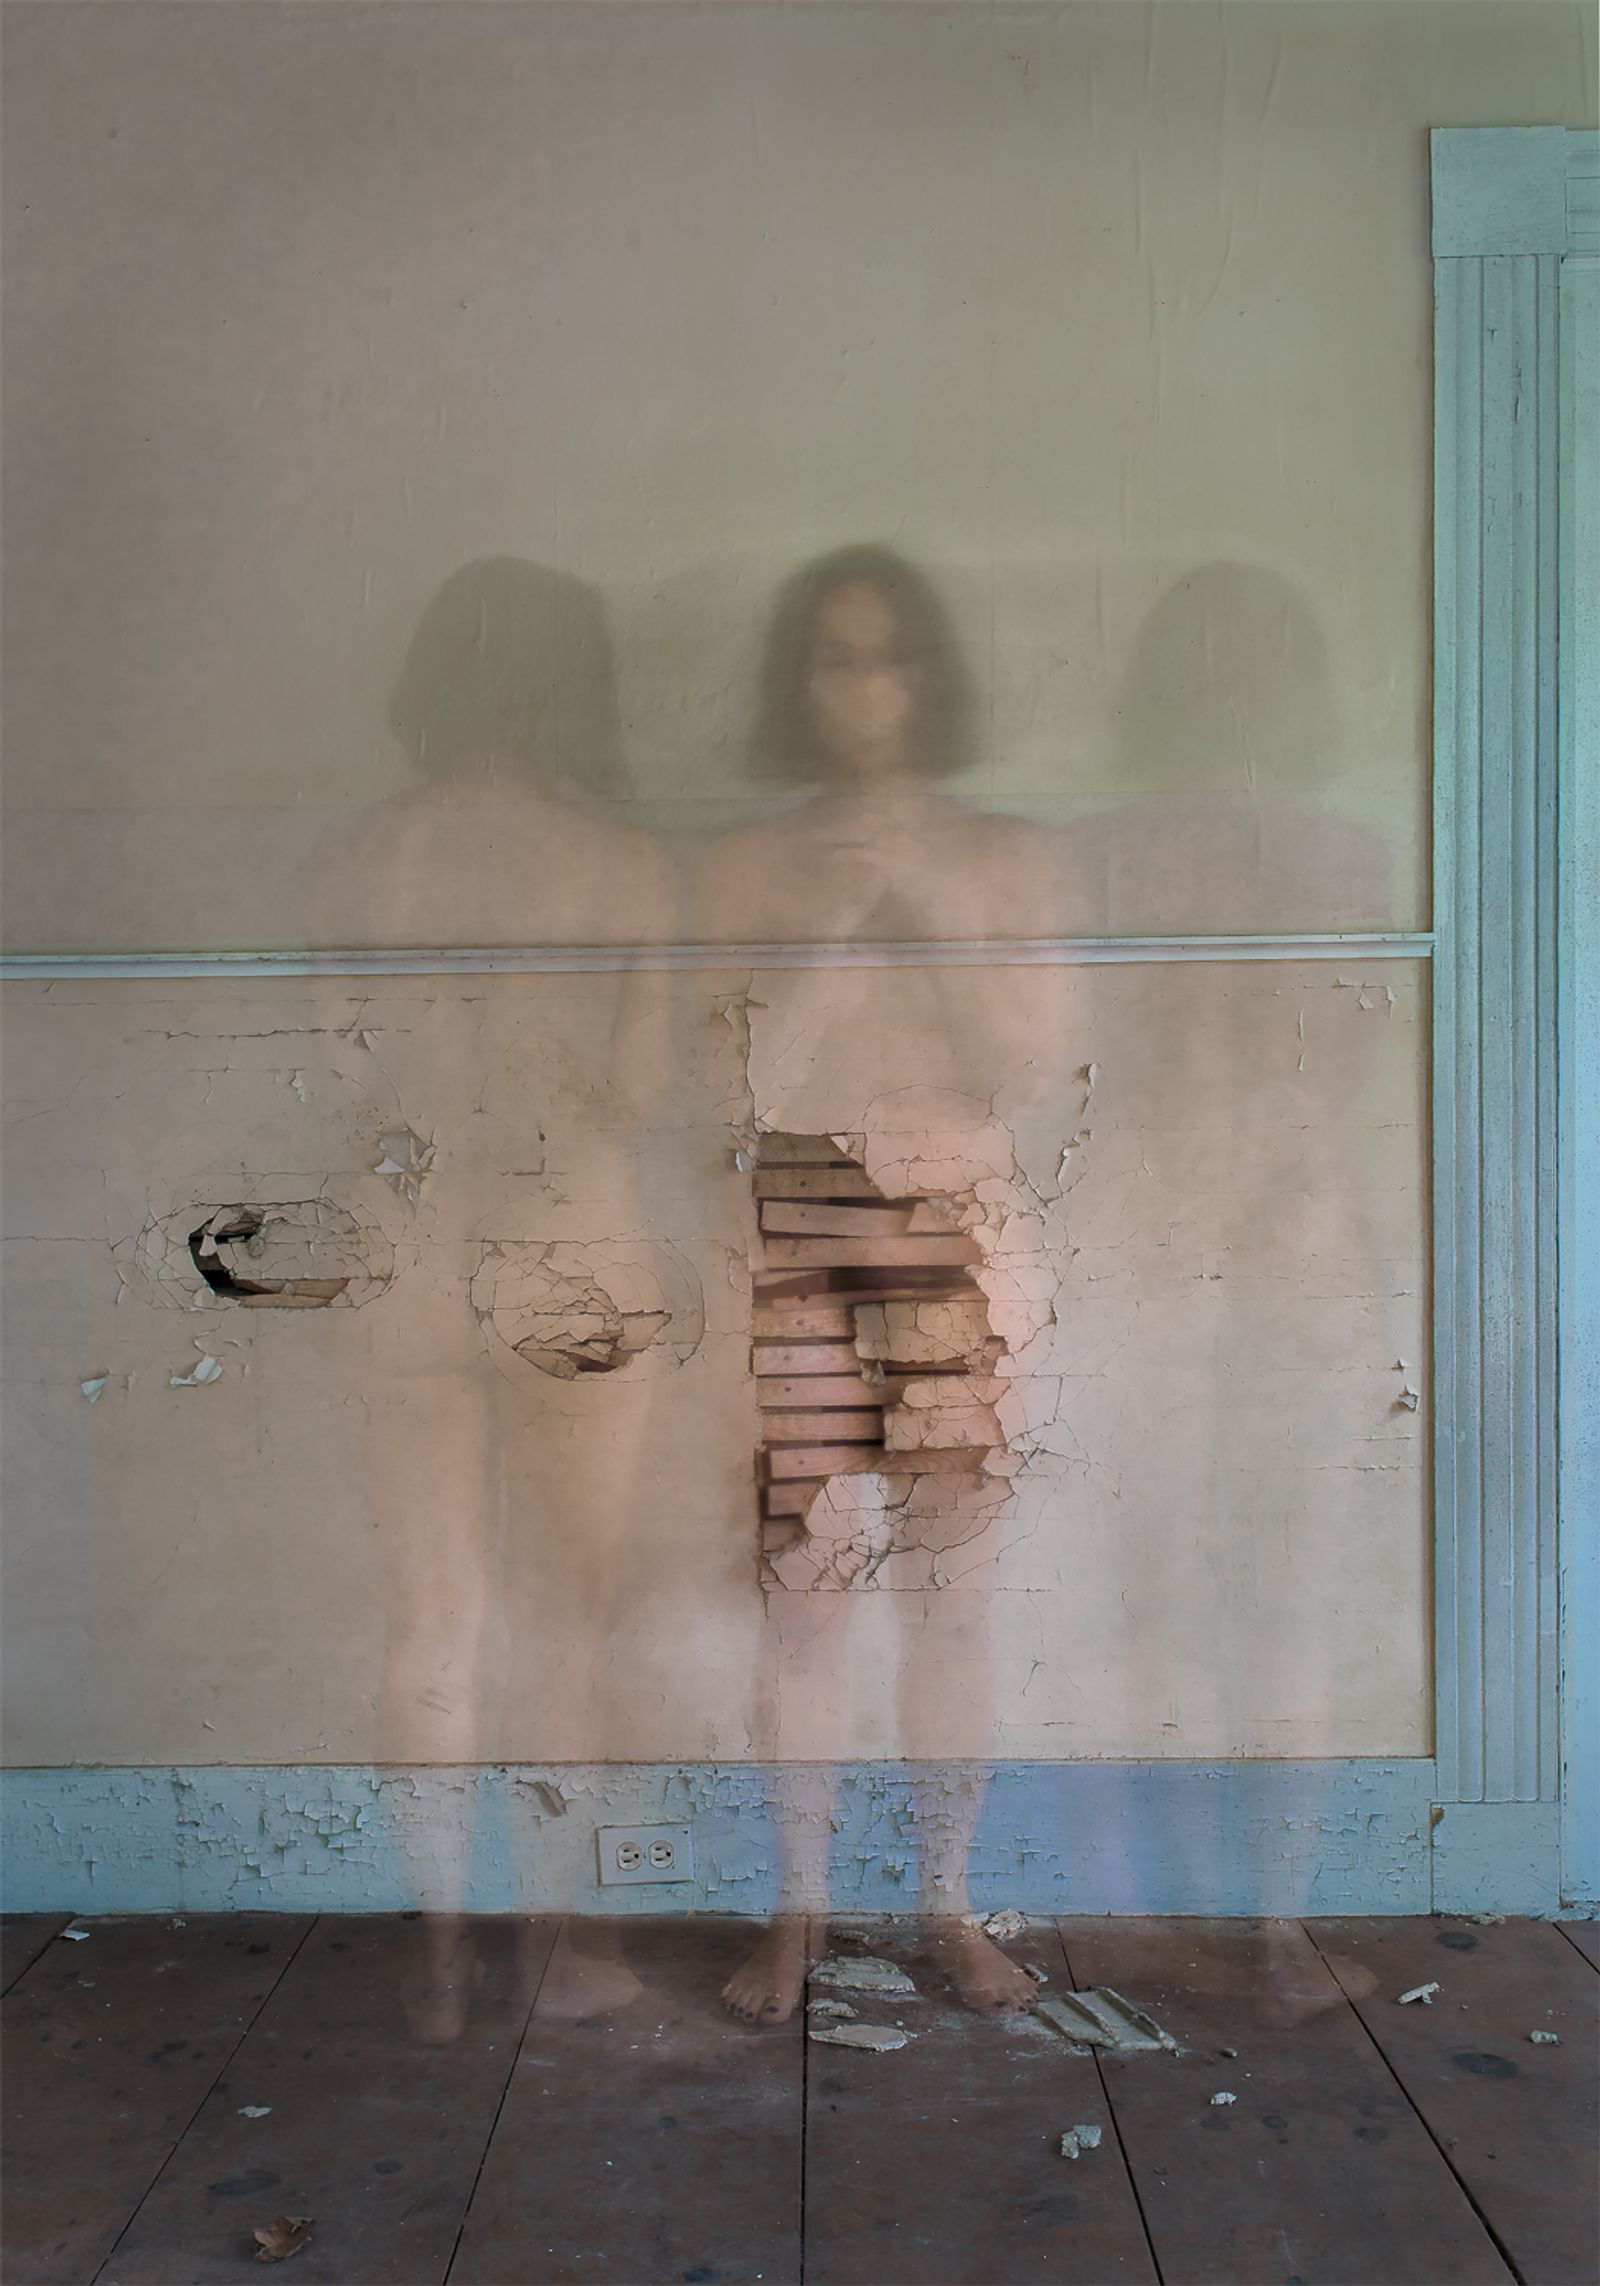 © Jo Ann Chaus - Image from the Fragments photography project